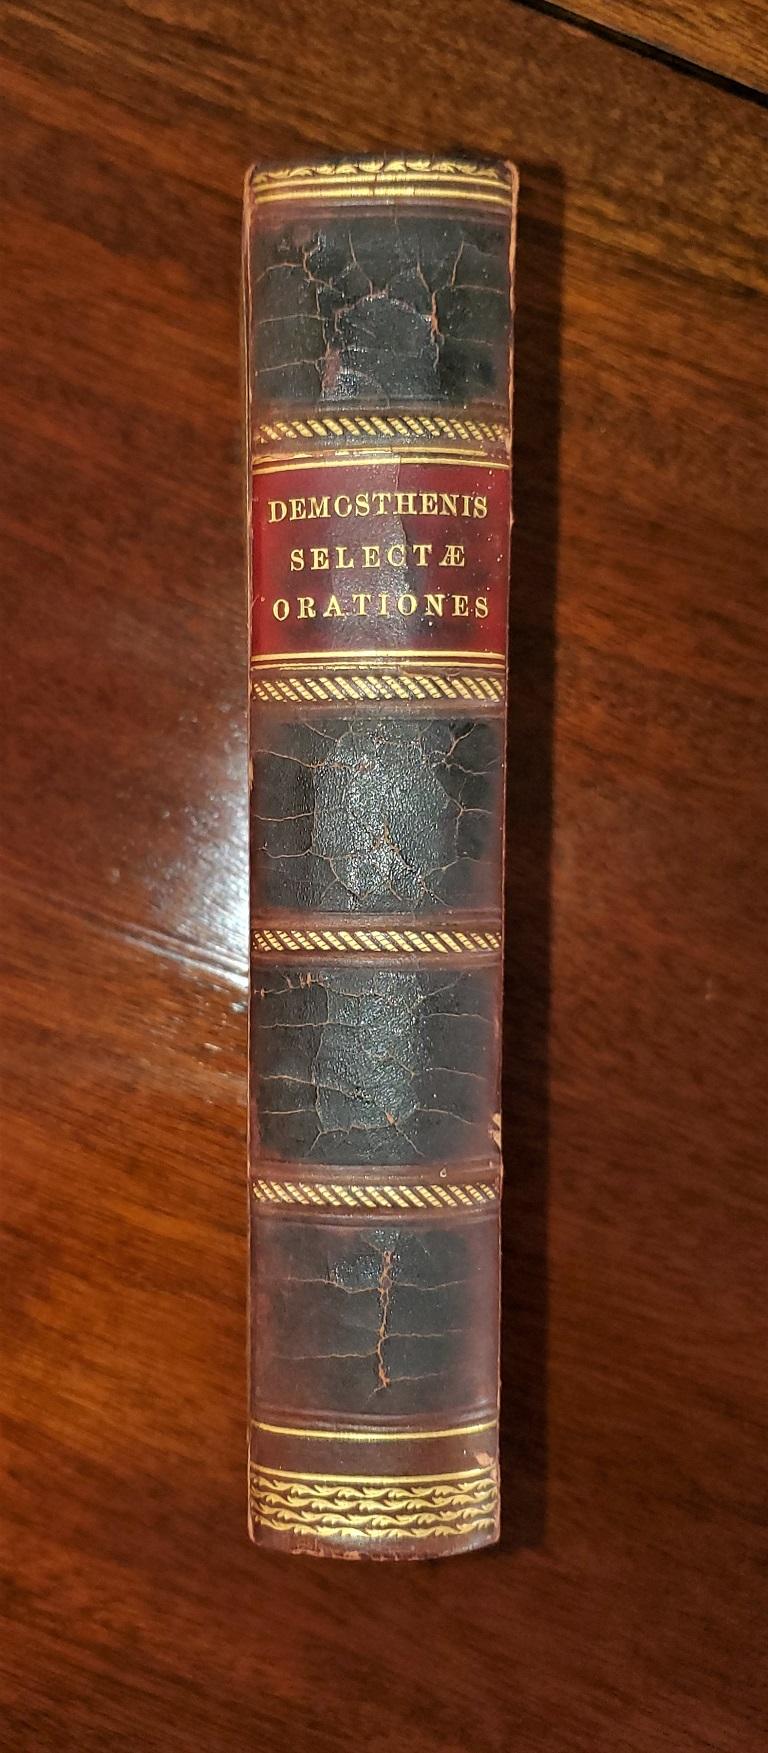 Demosthenis Selectae Orationes by Richard Mounteney 1791 7th Edition ...